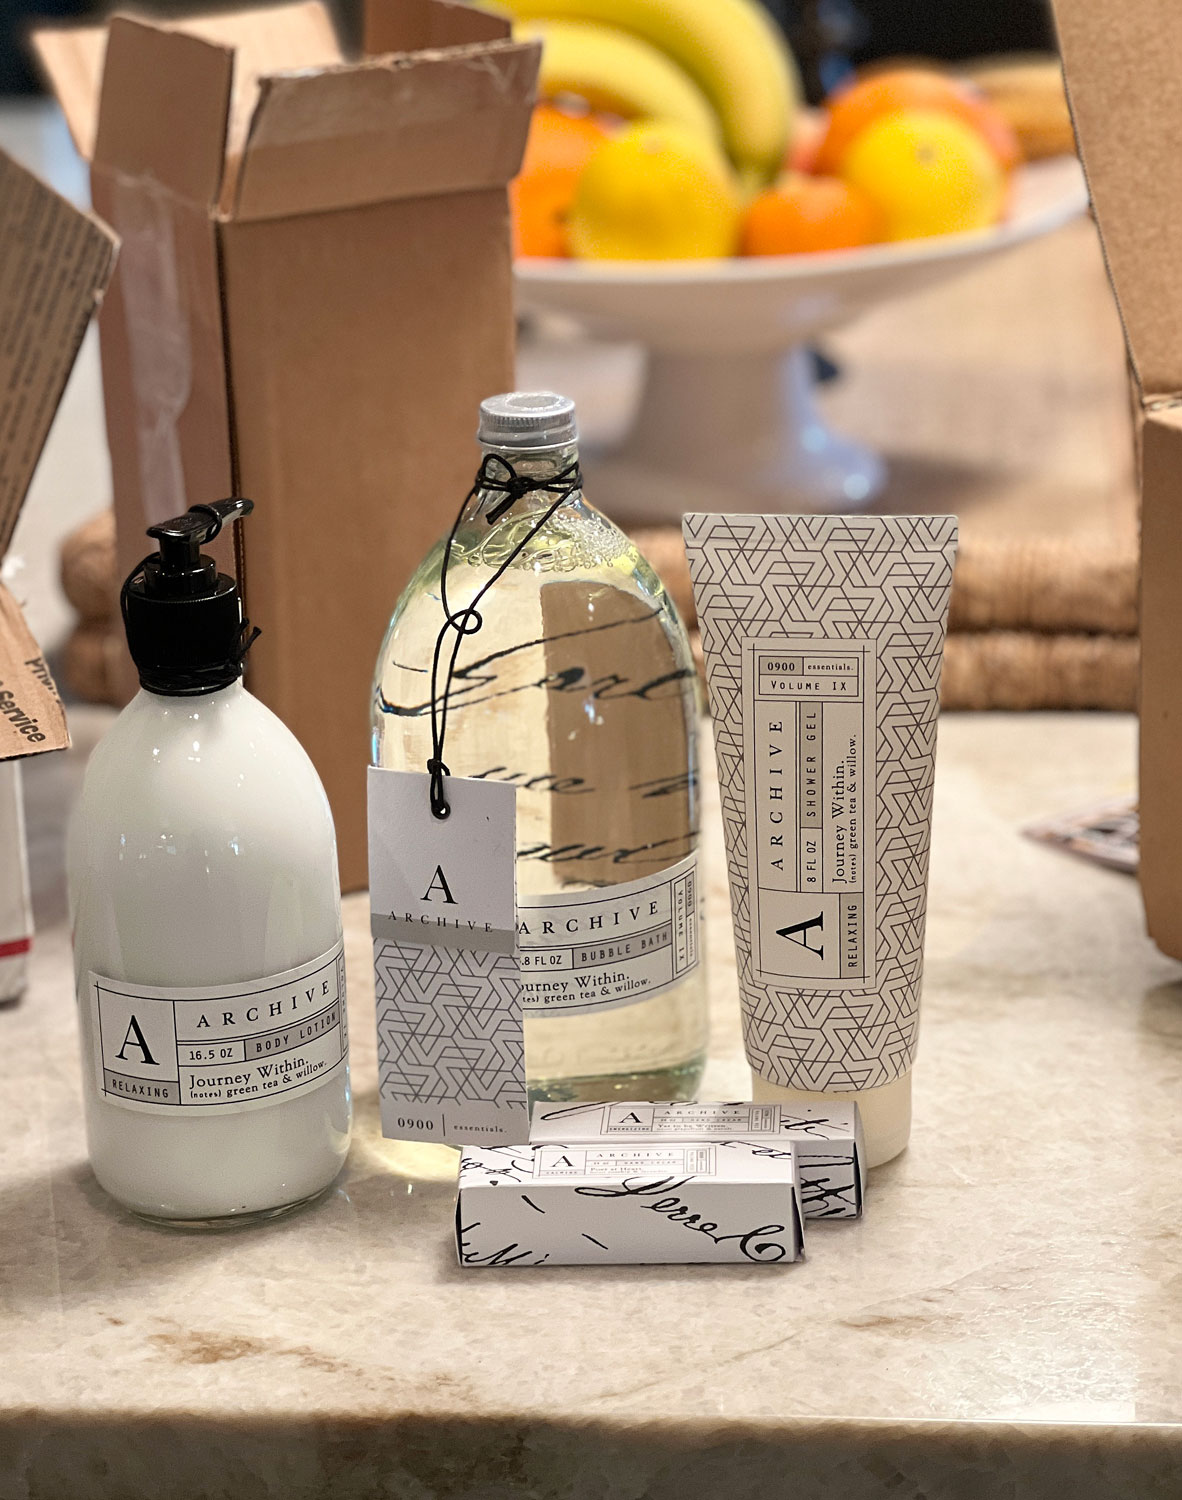 Archive bath products